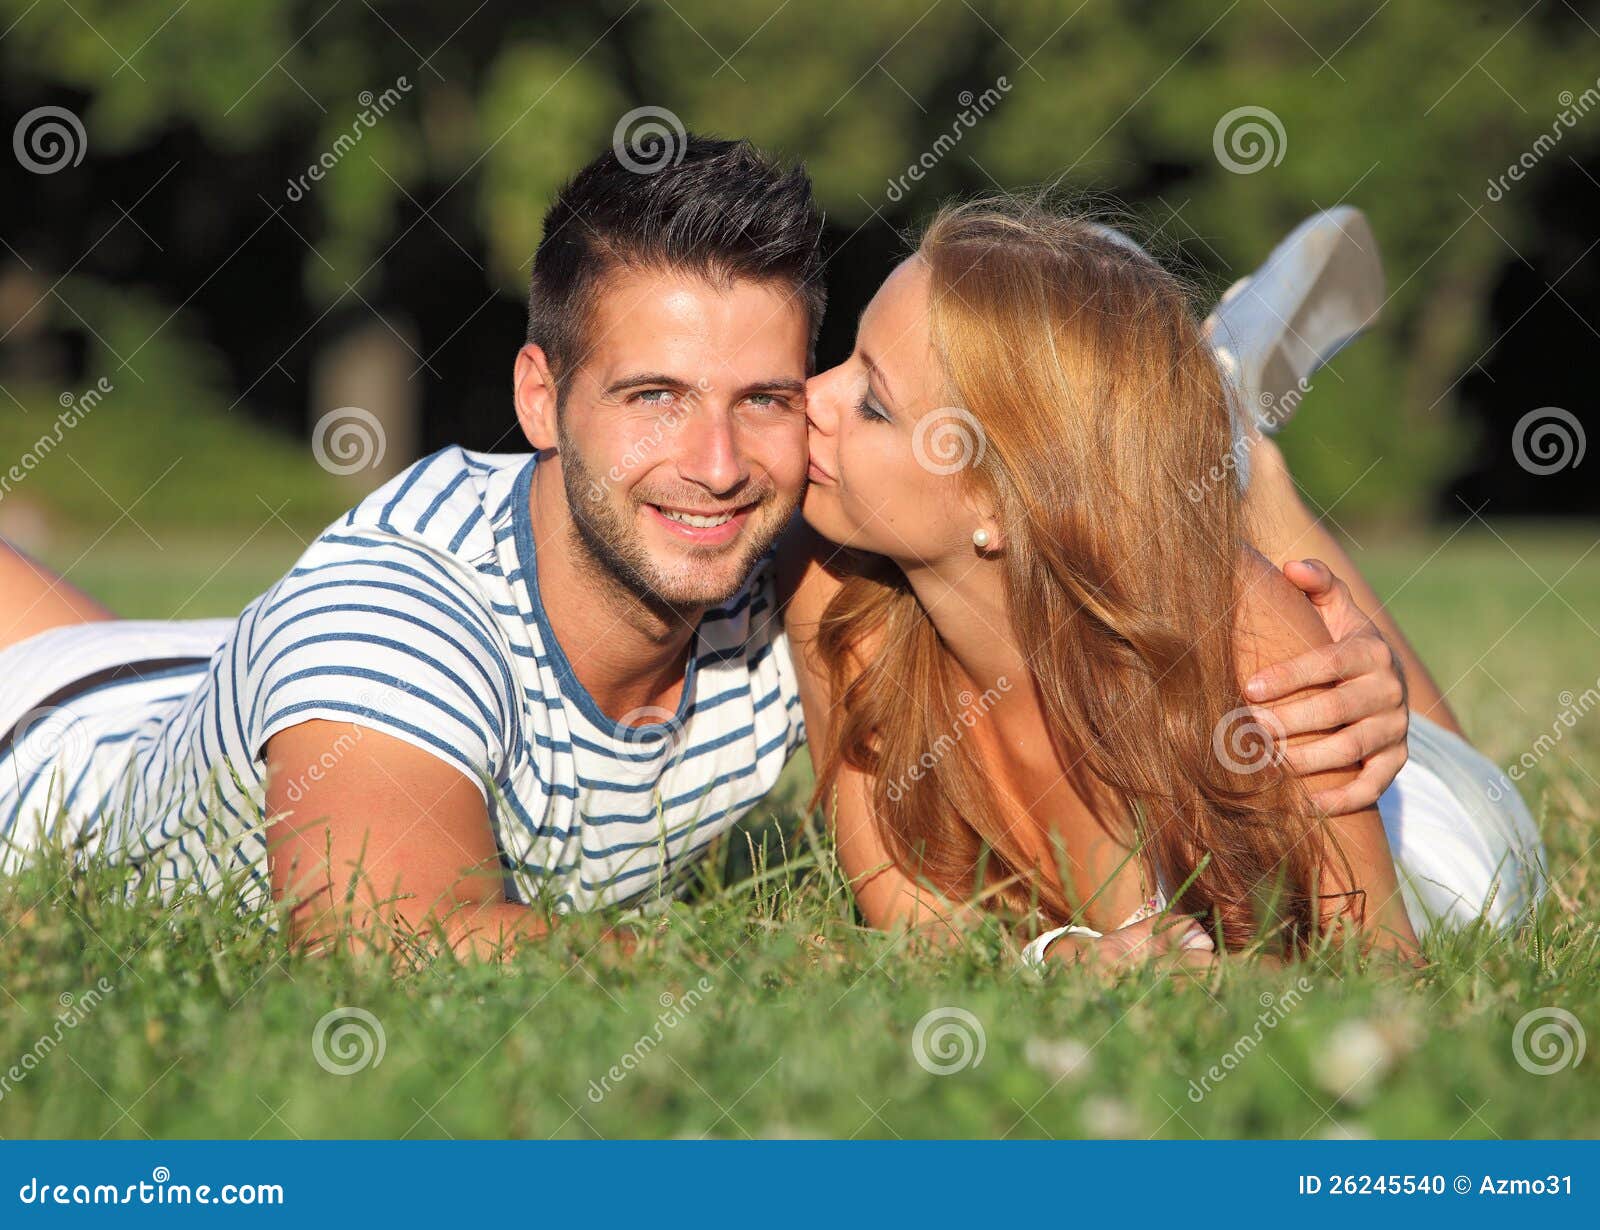 Happy Girlfriend Kissing Her Friend Outdoor Stock Photo Image Of